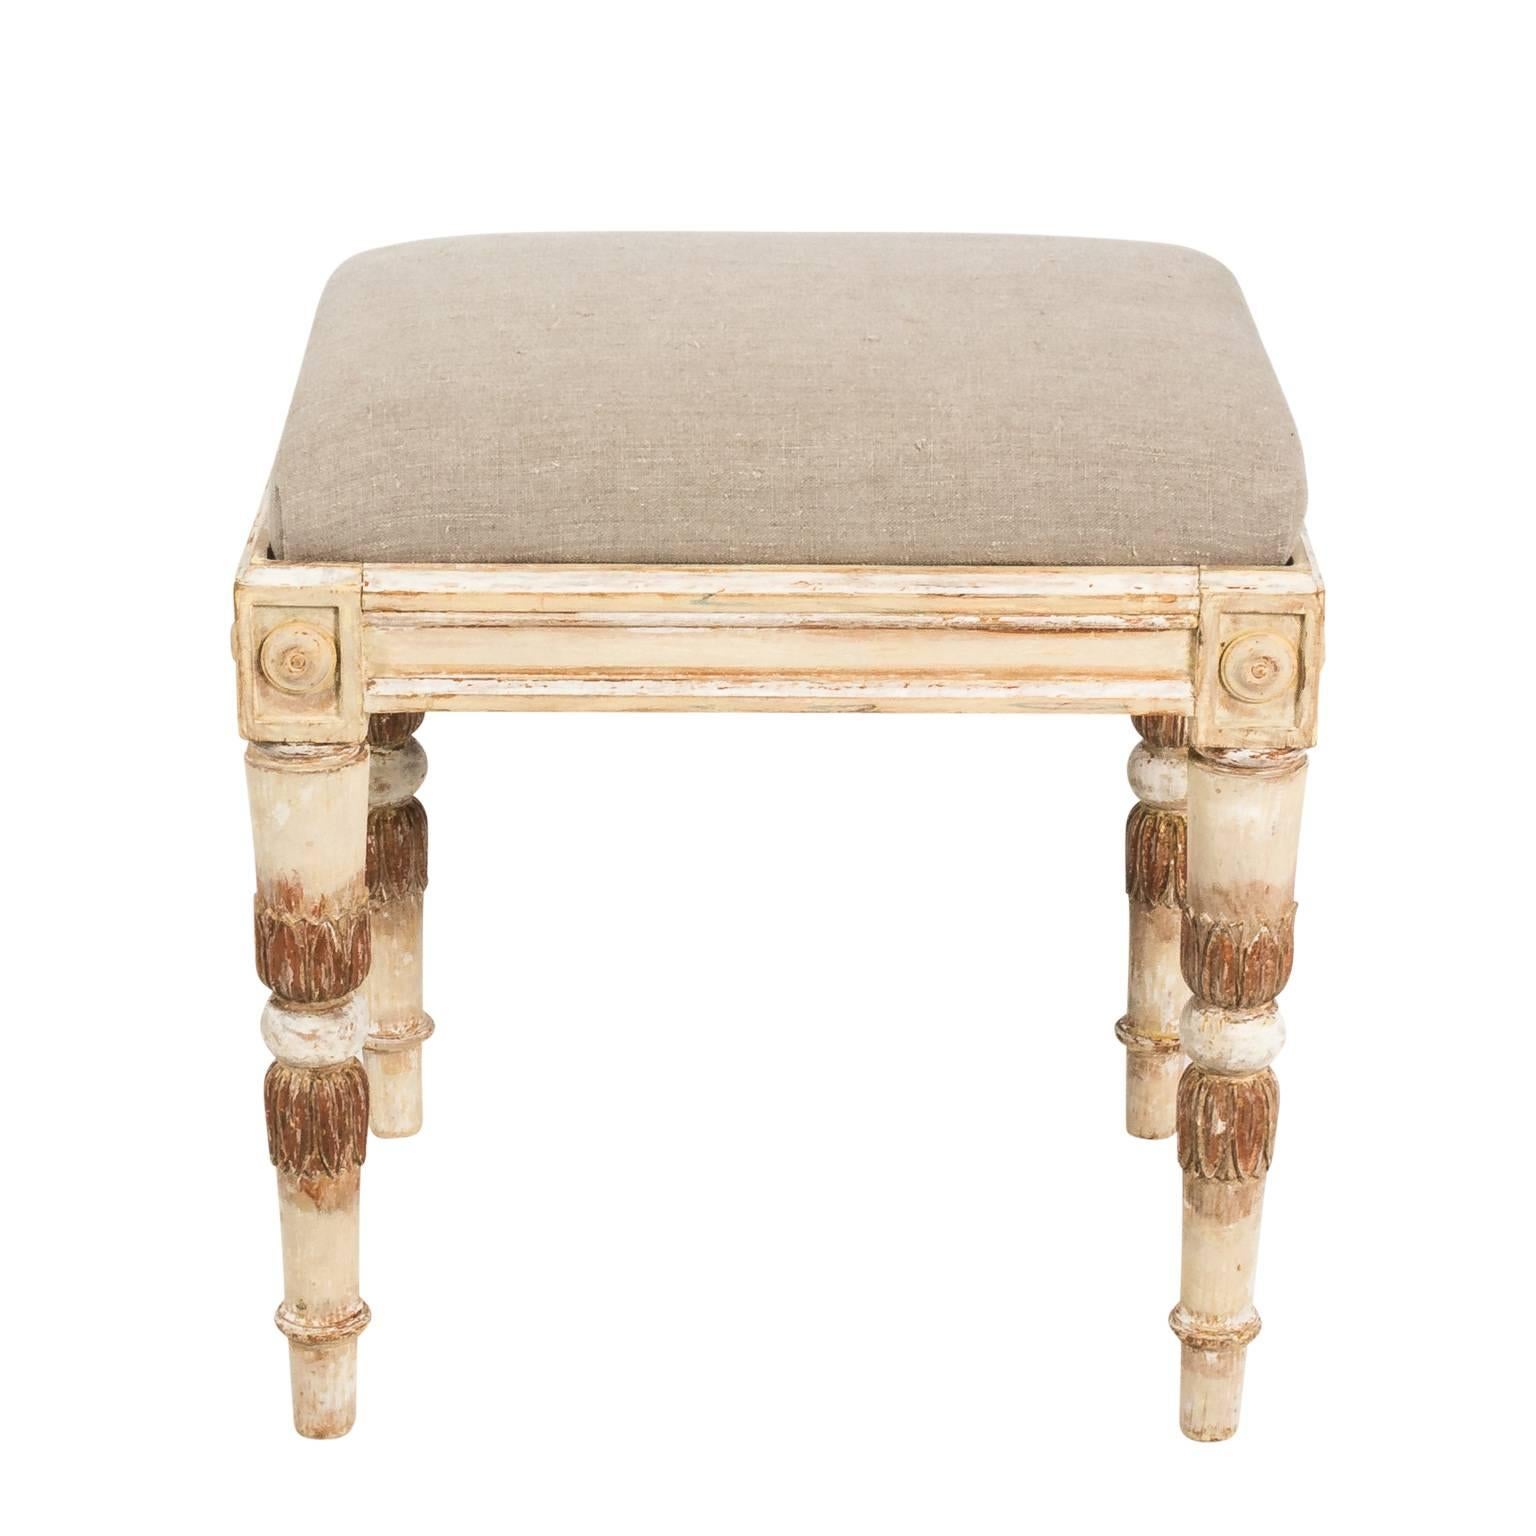 Pair of Gustavian style painted benches in a partially gilded finish with upholstered seats, circa early 20th century.
 